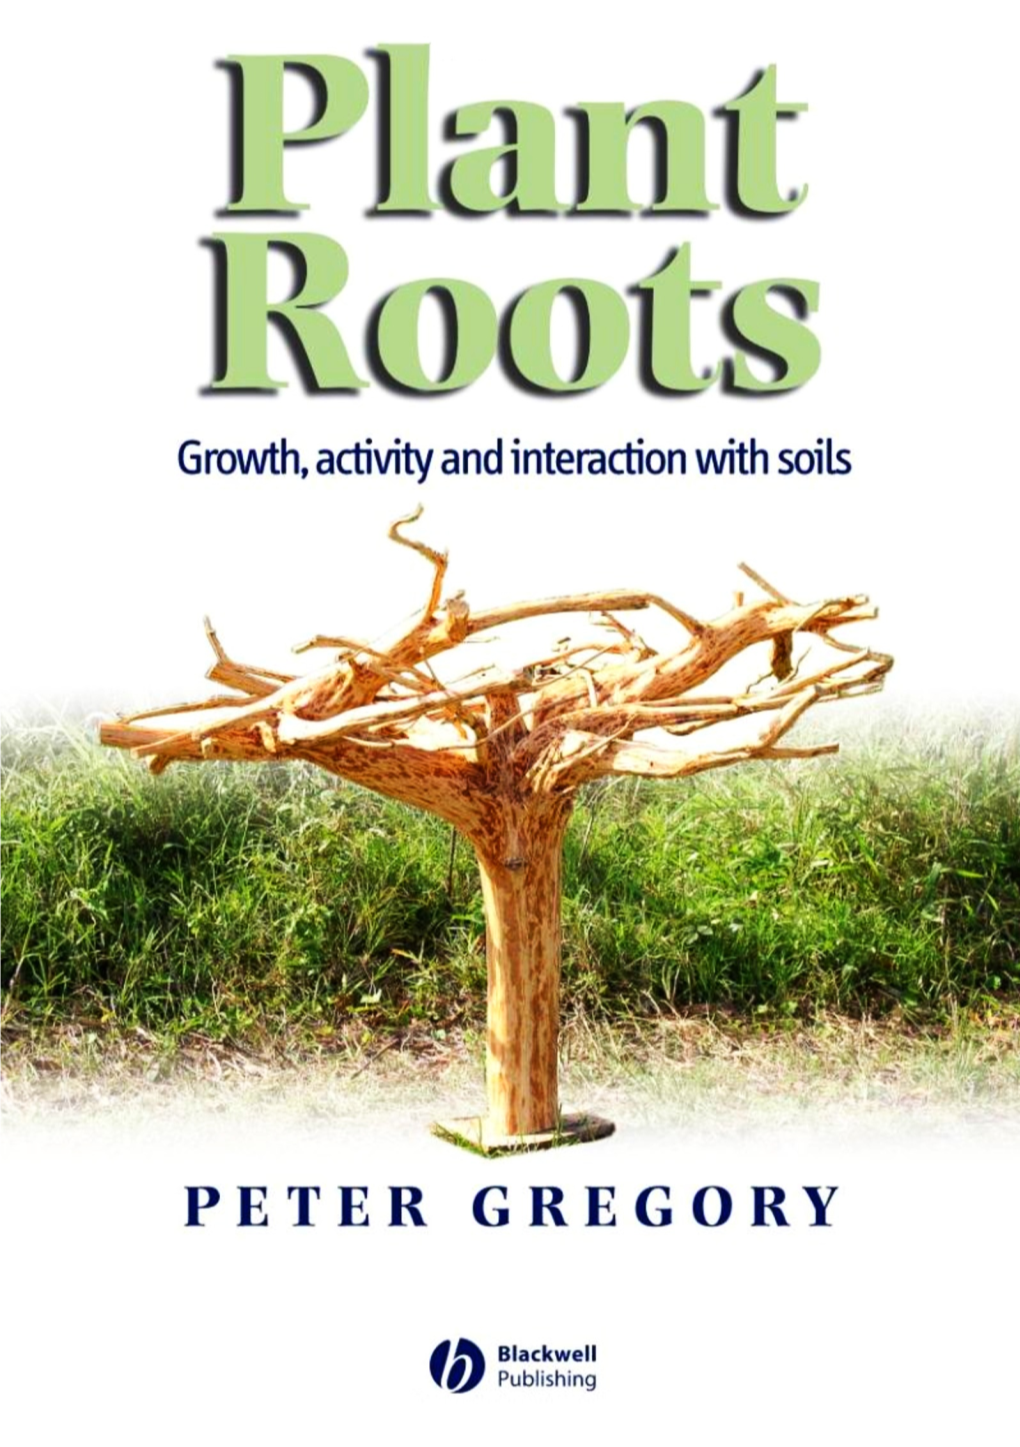 Plant Roots Growth, Activity and Interaction with Soils